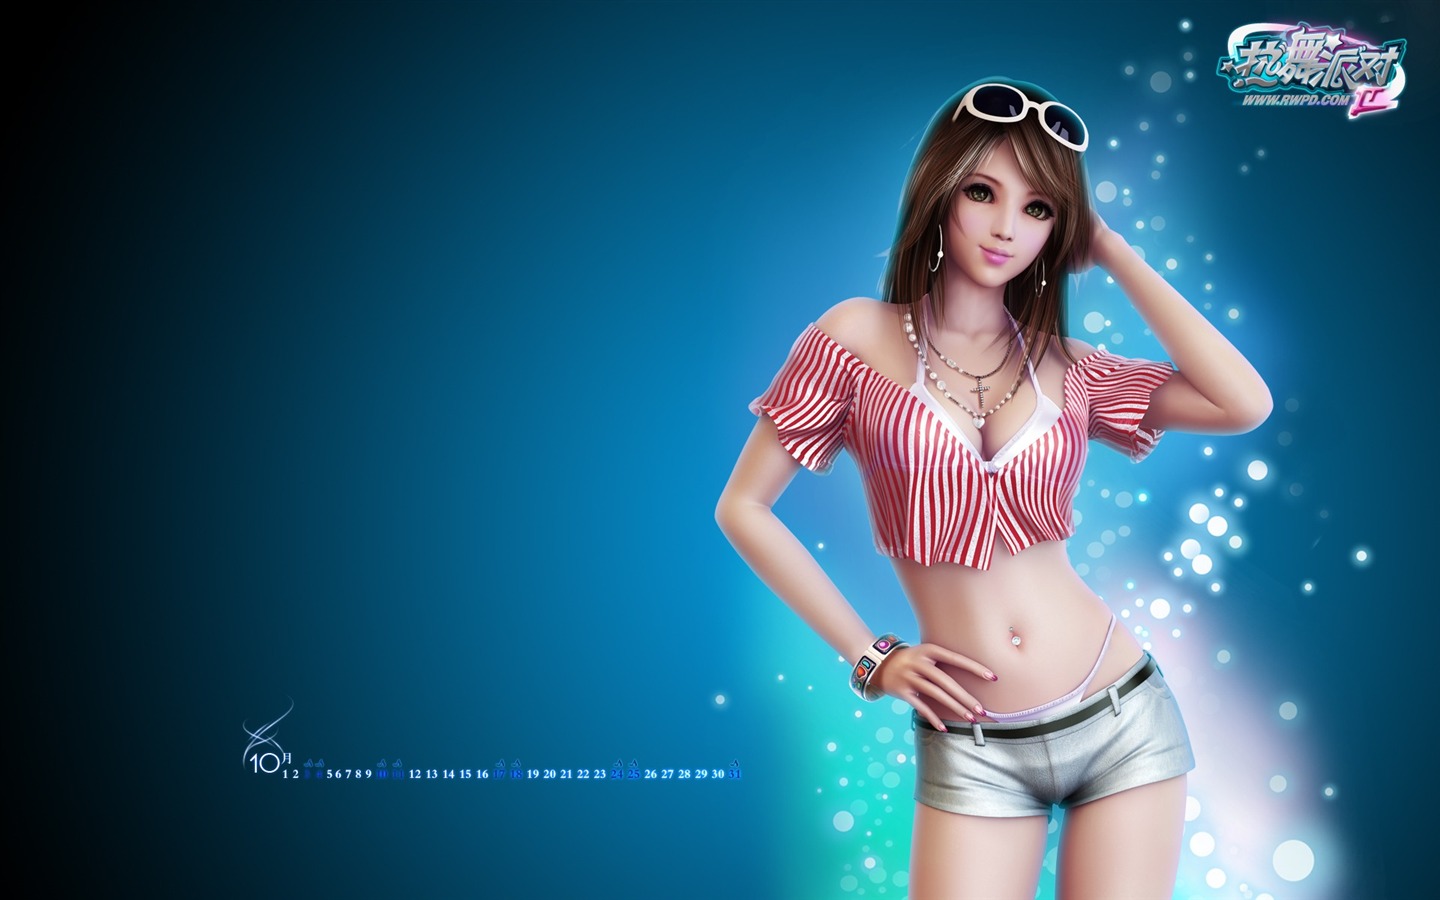 Online game Hot Dance Party II official wallpapers #4 - 1440x900